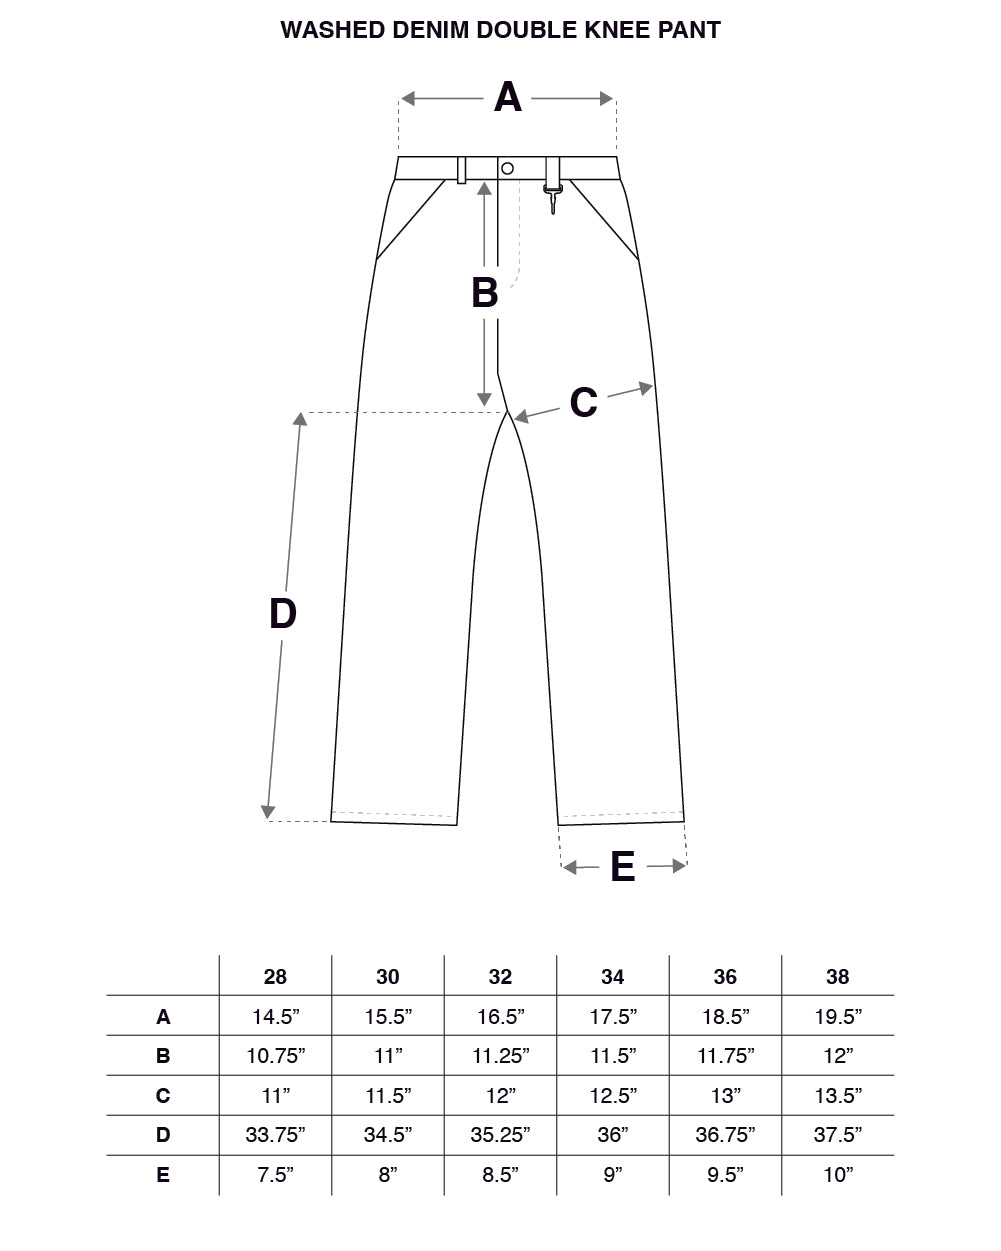 Washed Denim Double Knee Pant Size Guide